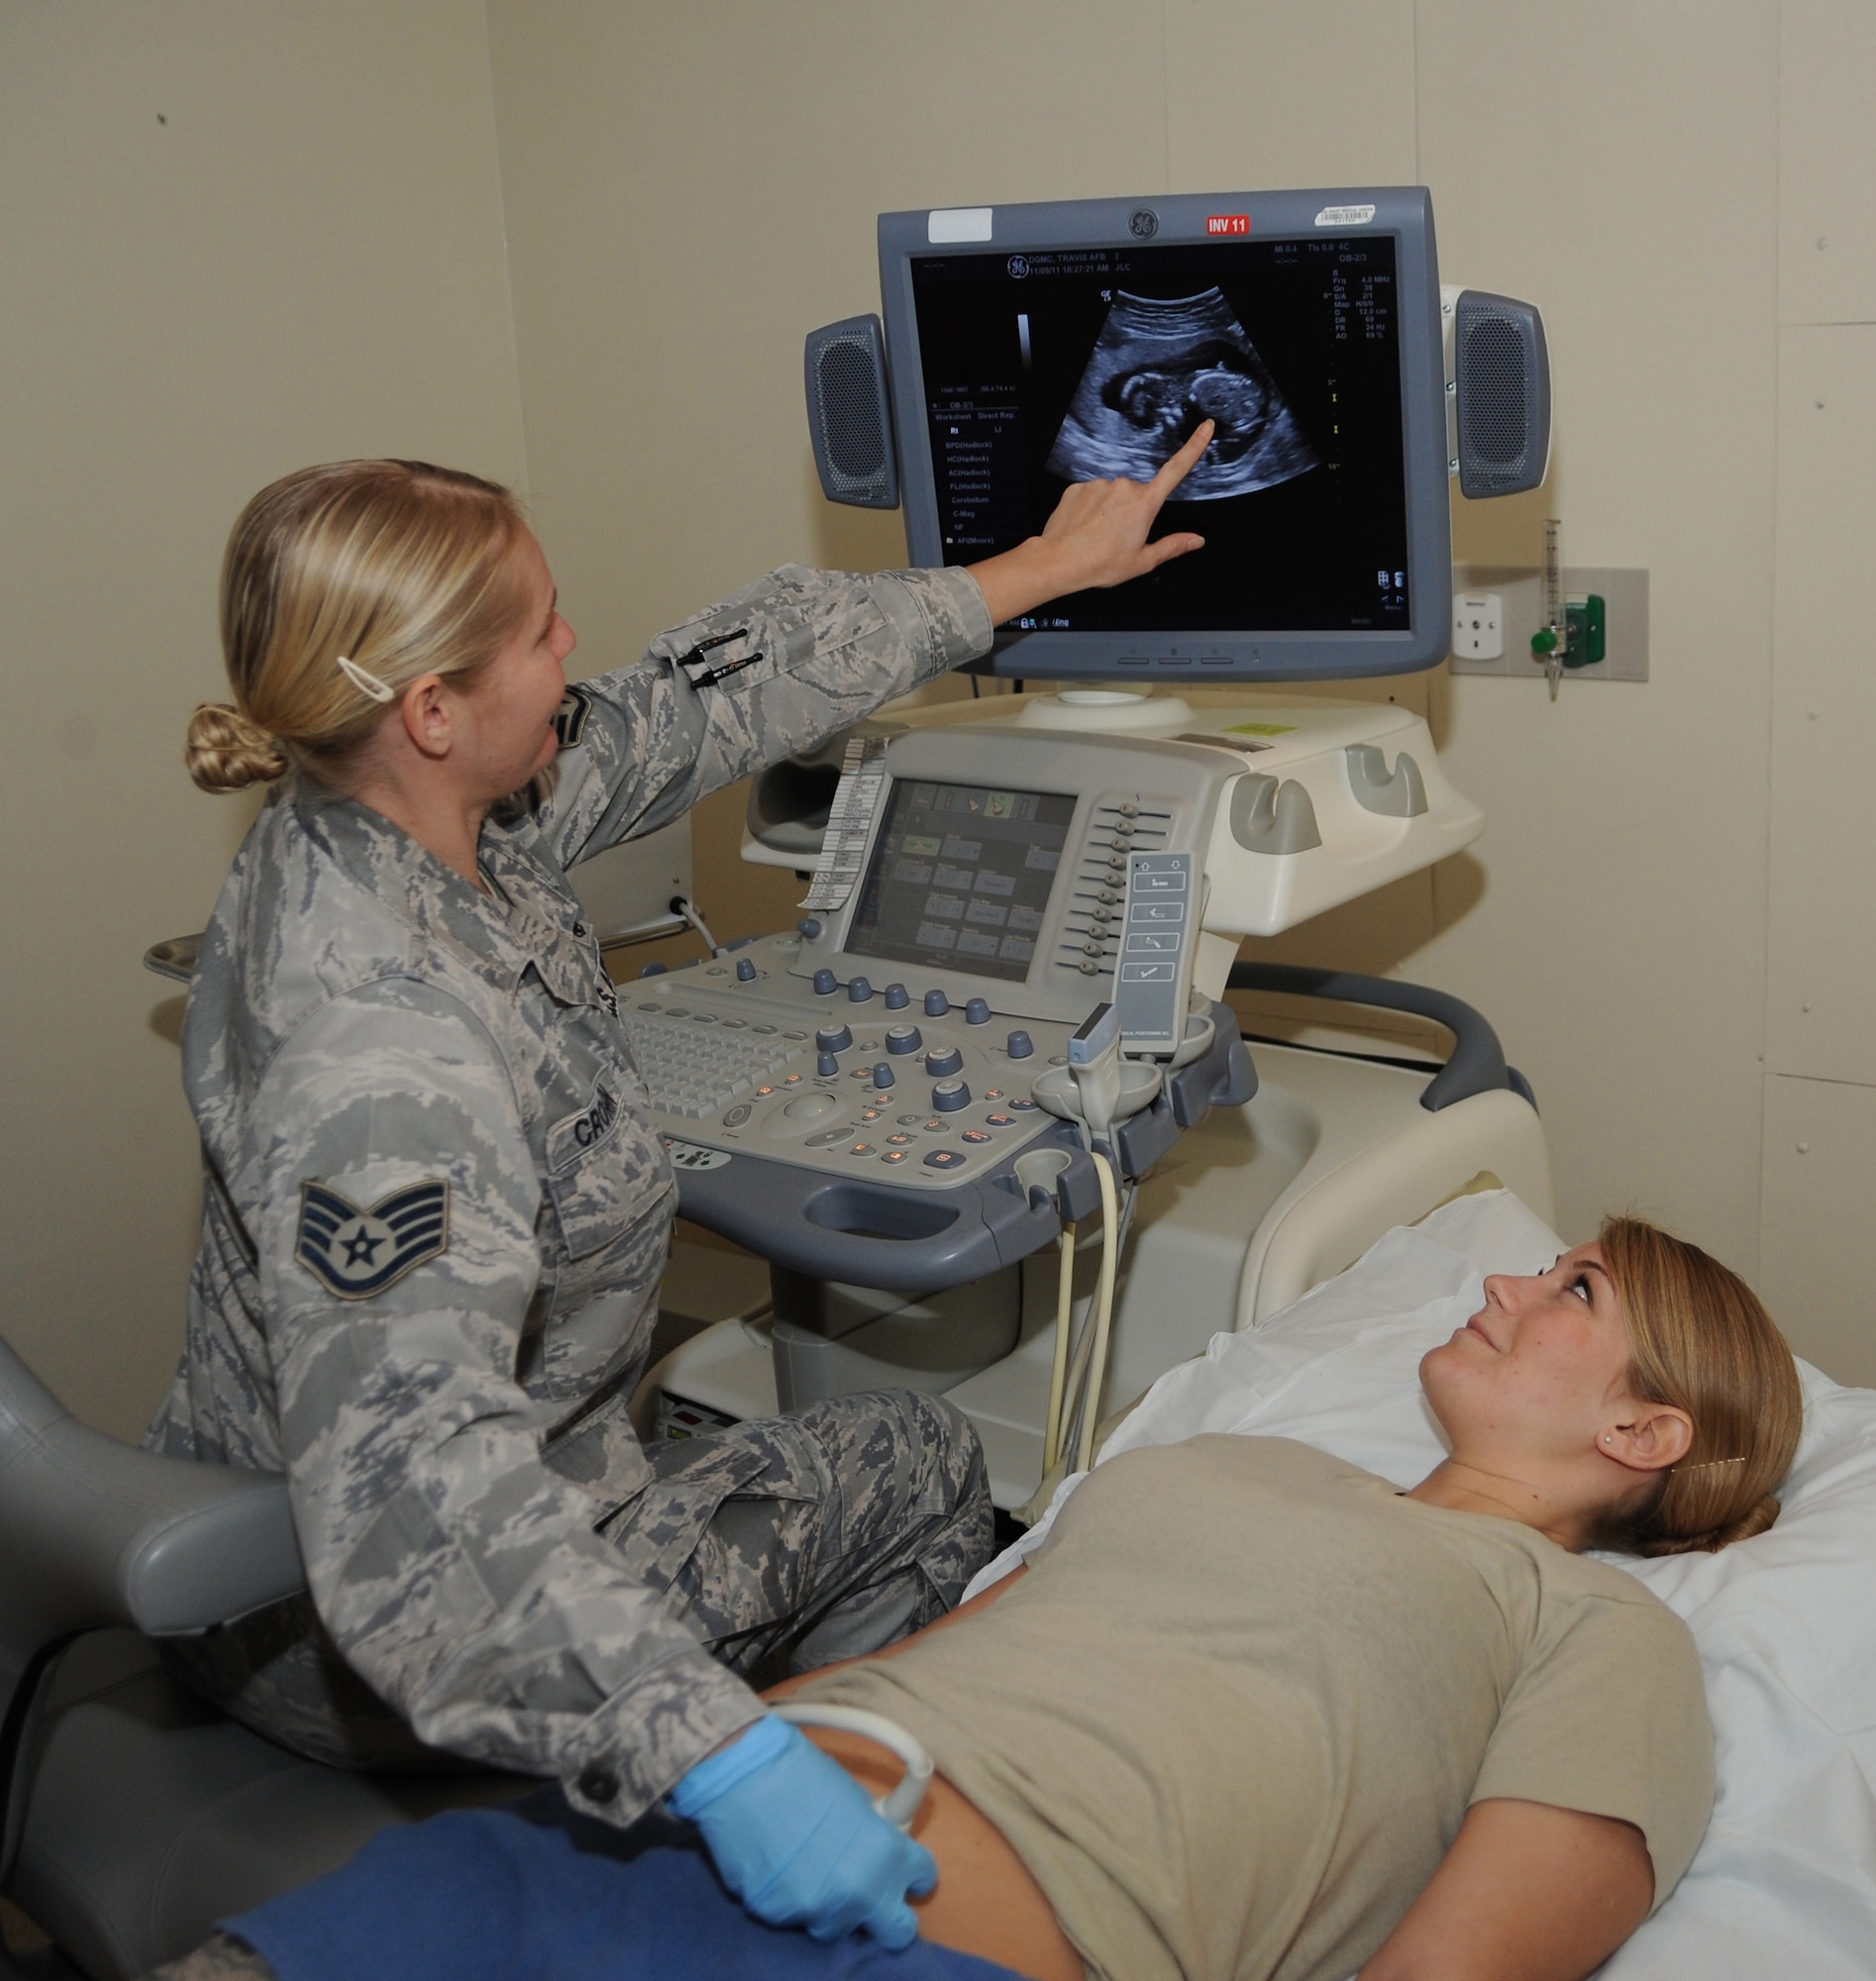 Staff Sgt. Jenny Cronin, ultrasonographer, performs an ultrasound exam on SSgt Christine Ramirez Nov. 9 at the David Grant USAF Medical Center. Ultrasound images are captured in real-time; they can show the structure and movement of the body's internal organs, as well as blood flowing through blood vessels. (U.S. Air Force photo/Staff Sgt. Liliana Moreno)